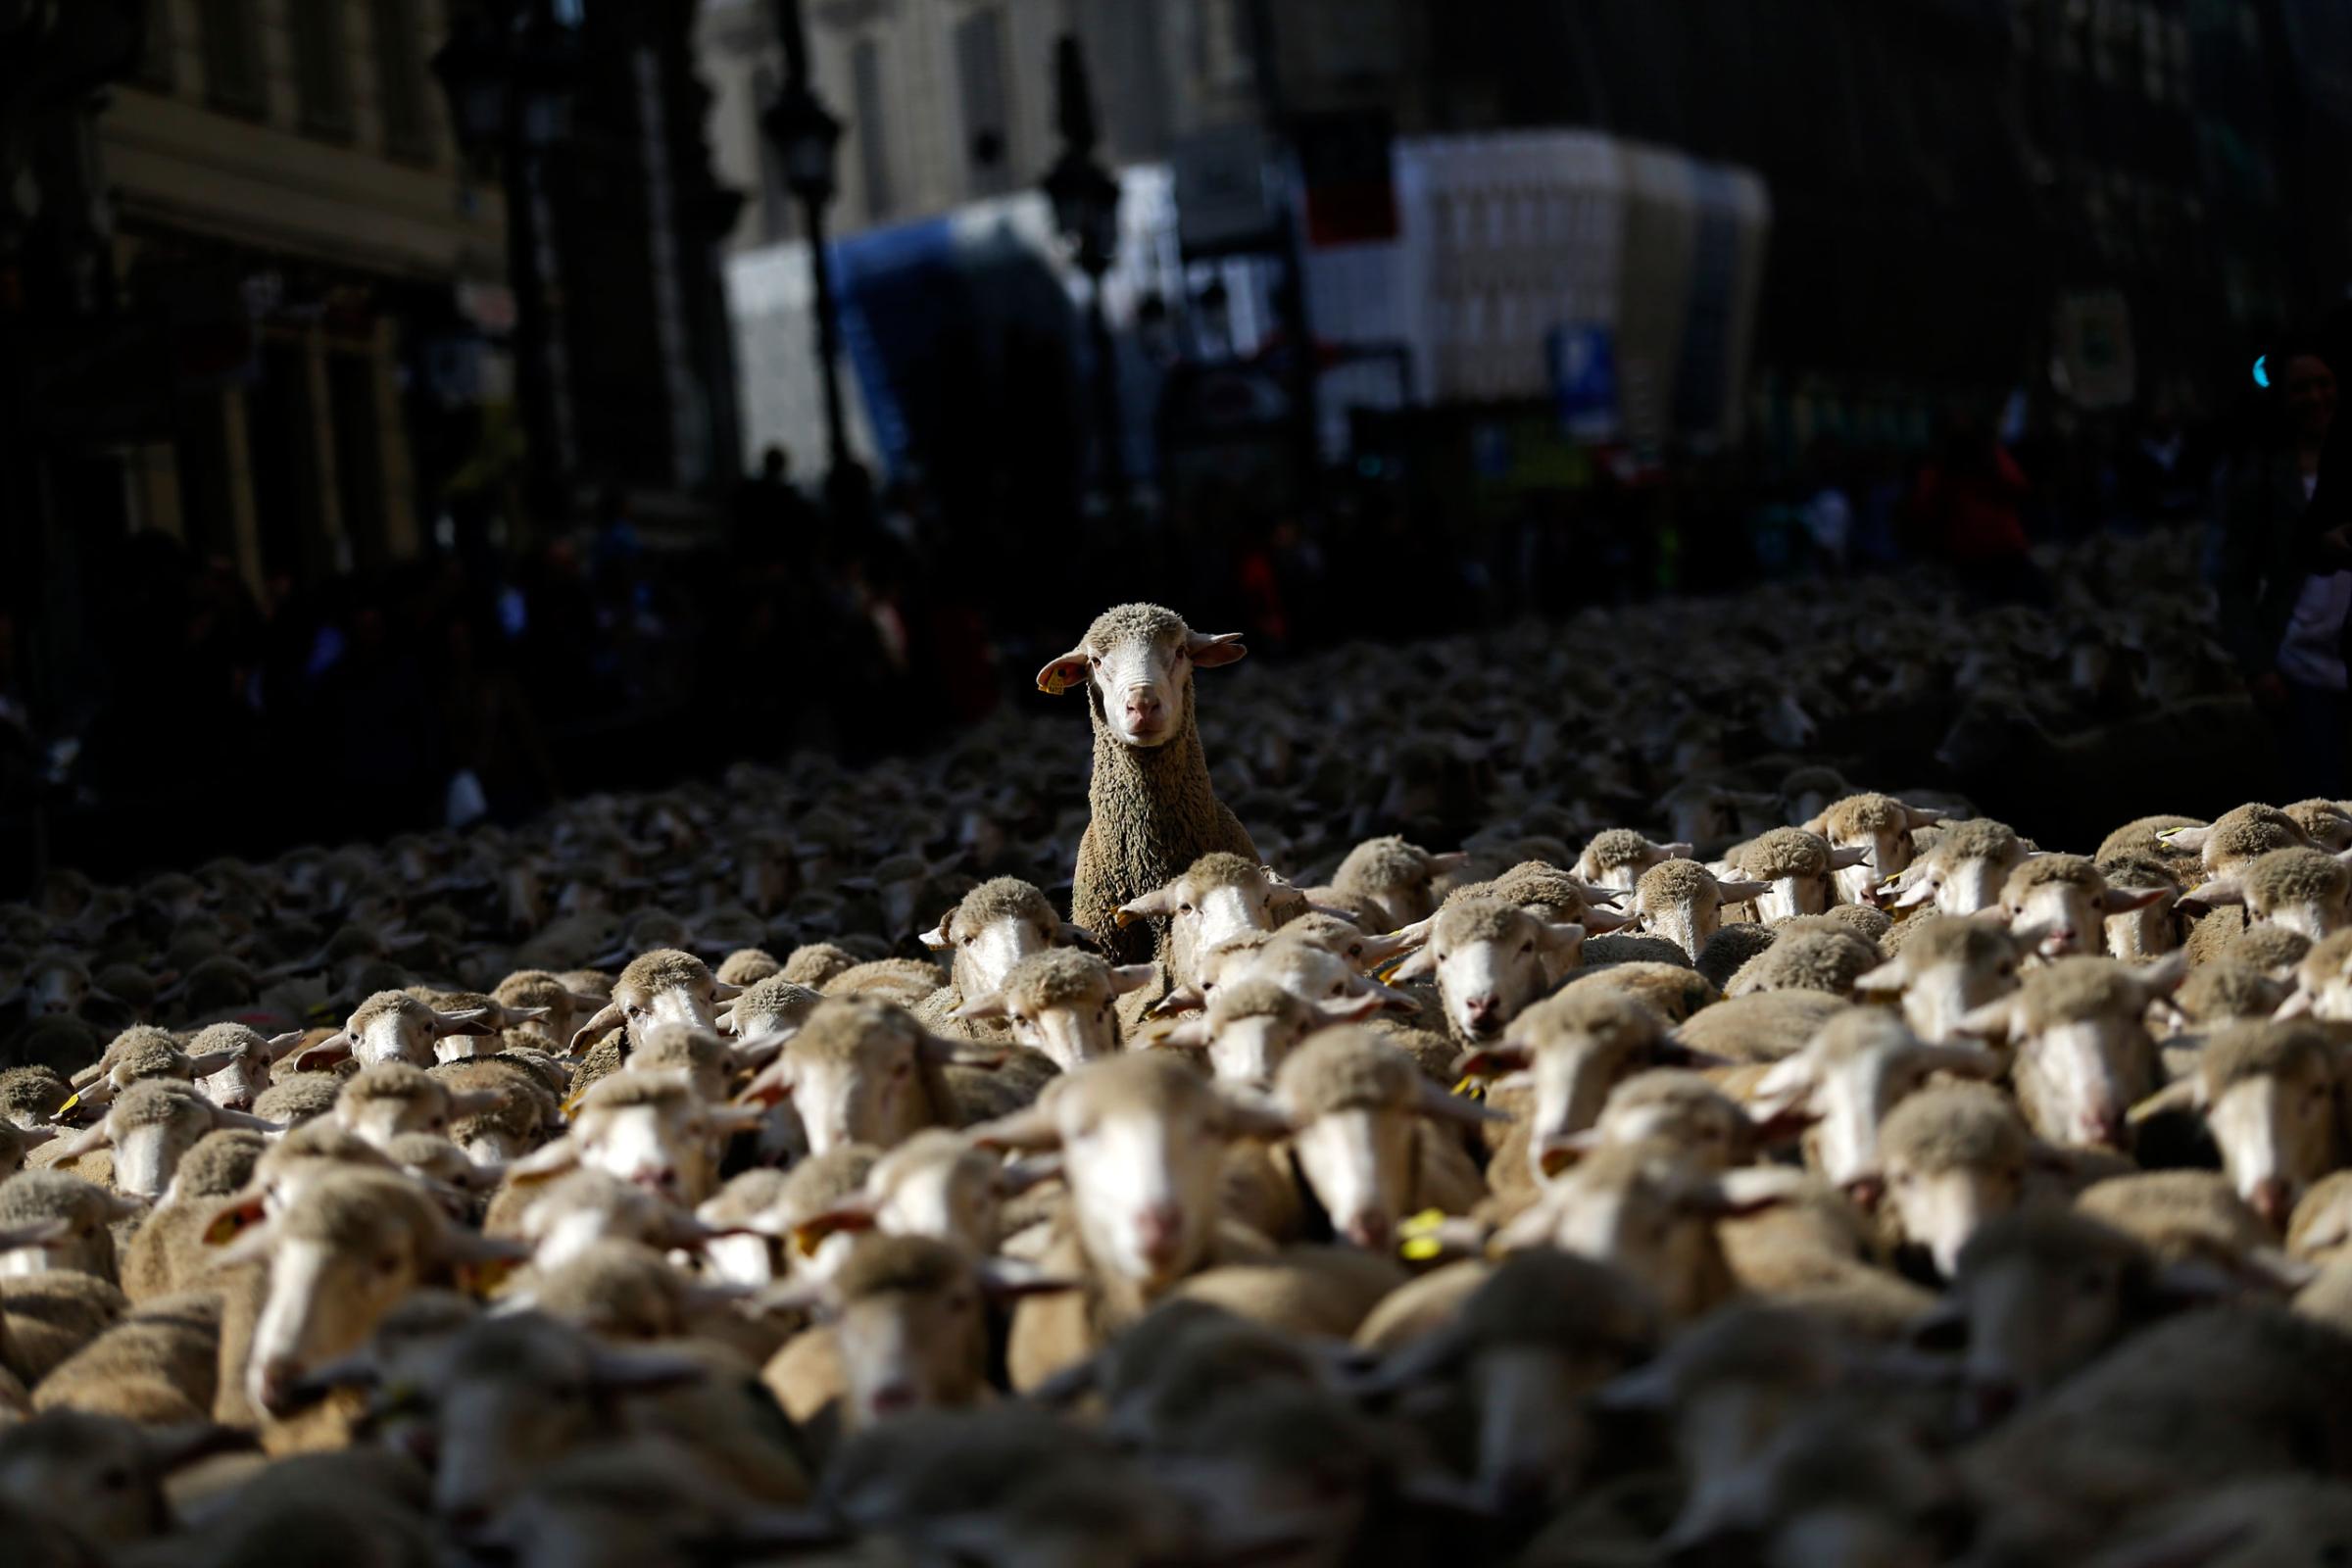 Sheep are led by shepherds through Madrid city center, Spain, Oct. 25, 2015. The flock of around 2,000 sheep is guided through Madrid streets in defense of ancient grazing, droving and migration rights increasingly threatened by urban sprawl and modern agricultural practices.